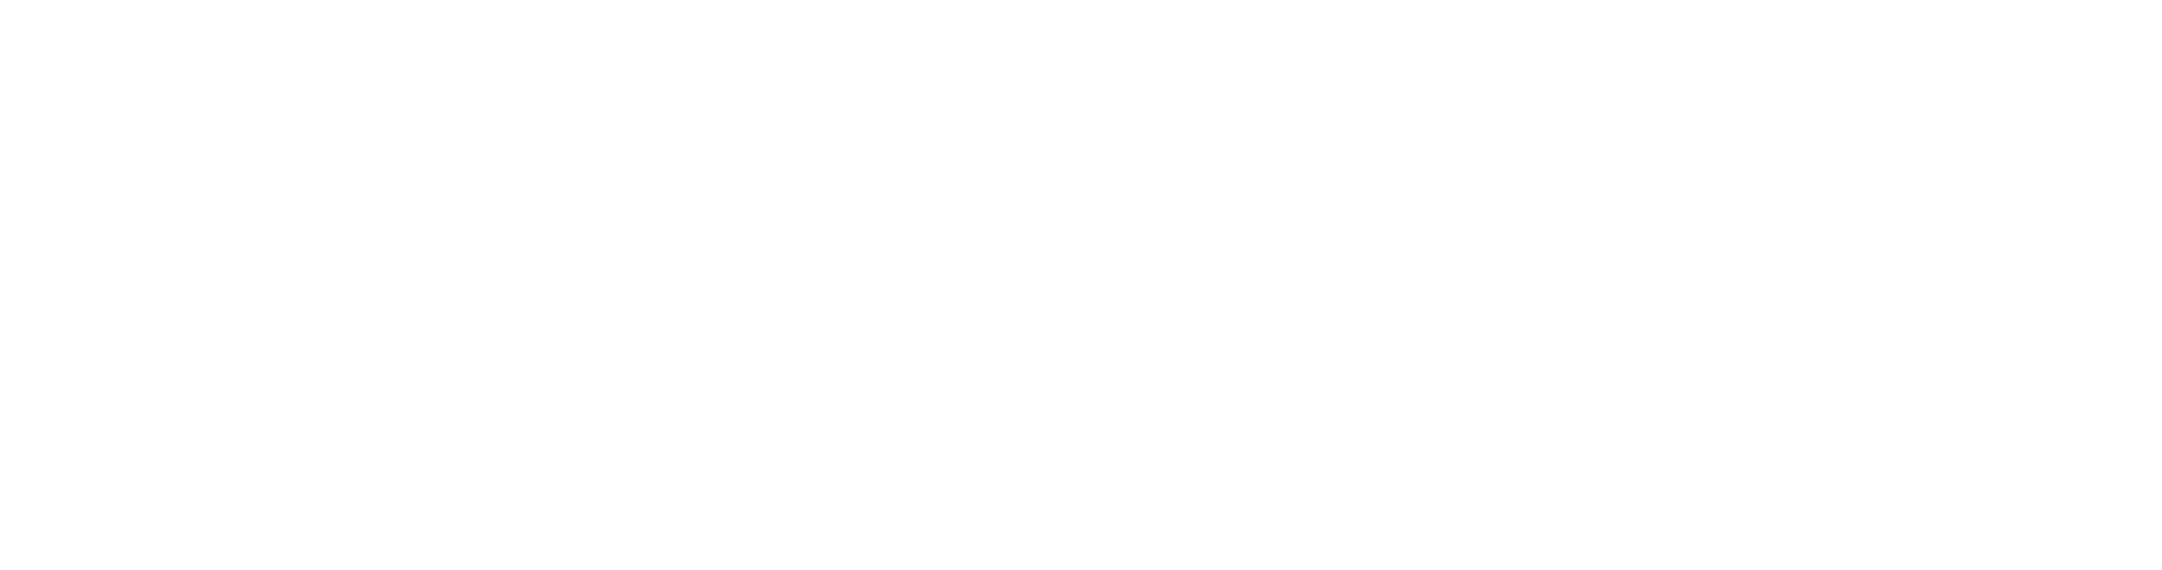 Lessons learned from a canceled play